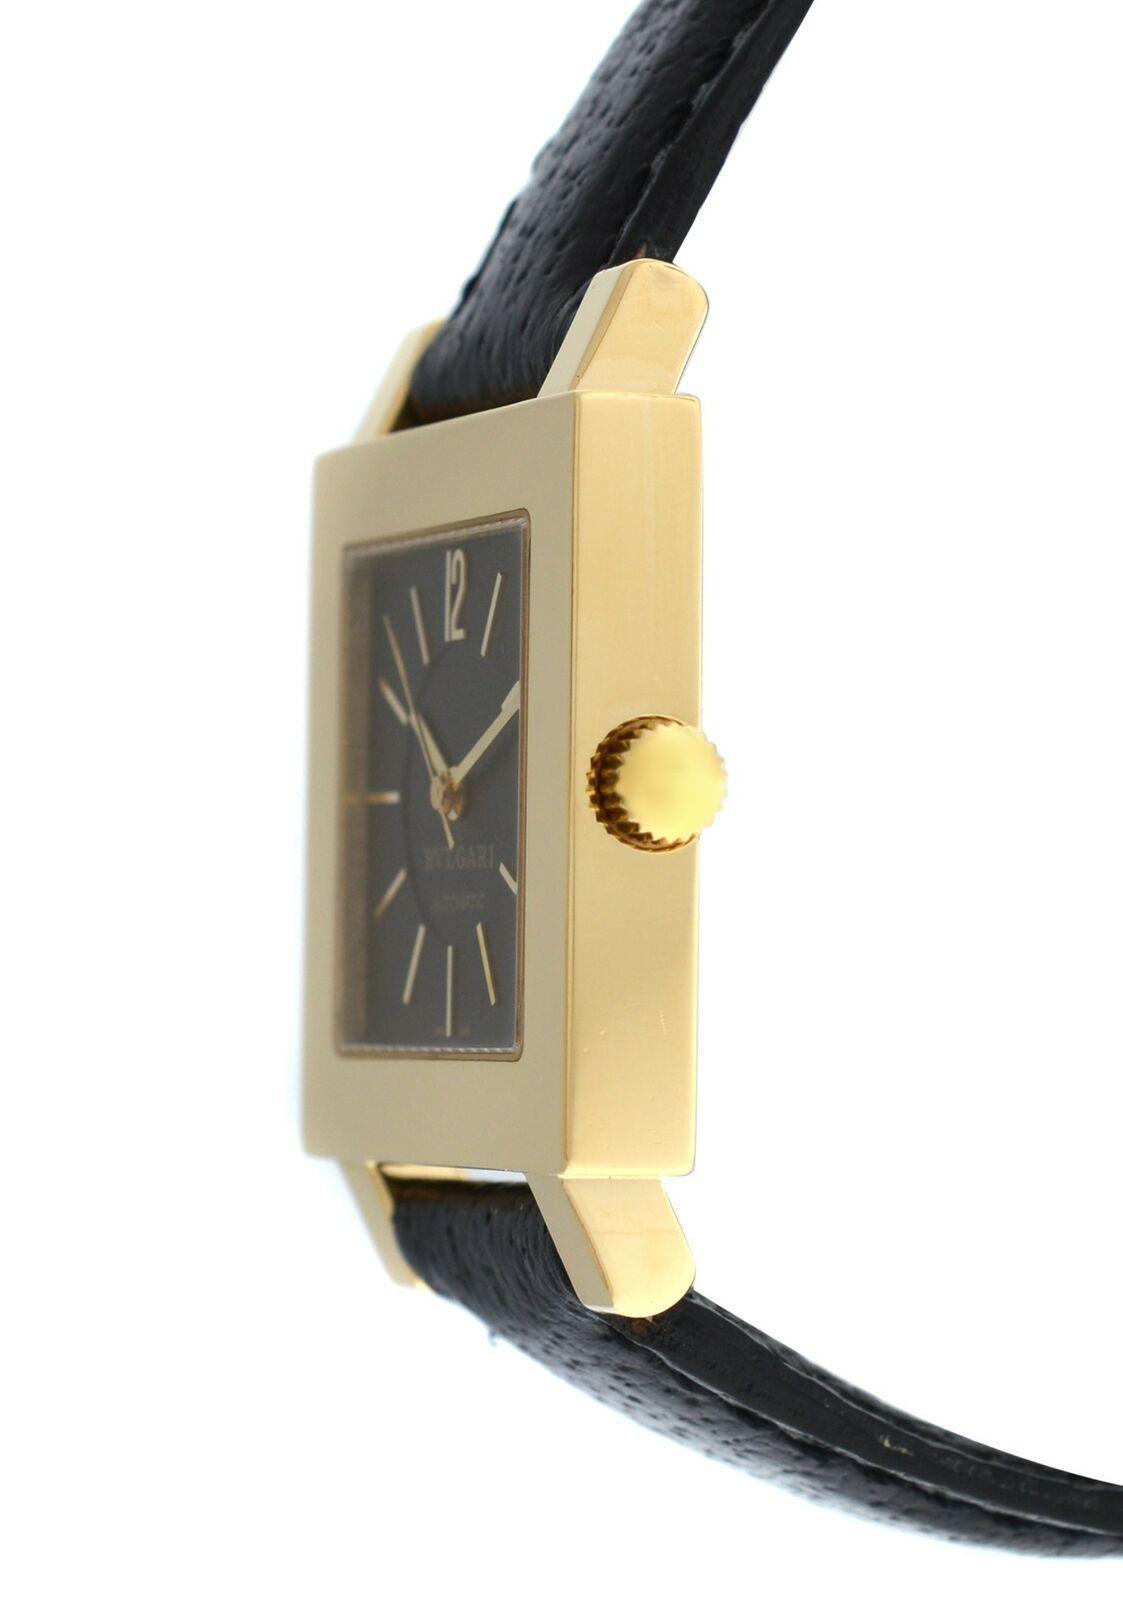 Brand Bvlgari
Model Quadrato SQ 29 GL AUTO
Gender Men's Unisex
Condition Pre-owned
Movement Swiss Automatic
Case Material 18K Gold
Bracelet / Strap Material
Genuine leather

Clasp / Buckle Material
18K Gold
Clasp Type Tang
Bracelet / Strap width 17